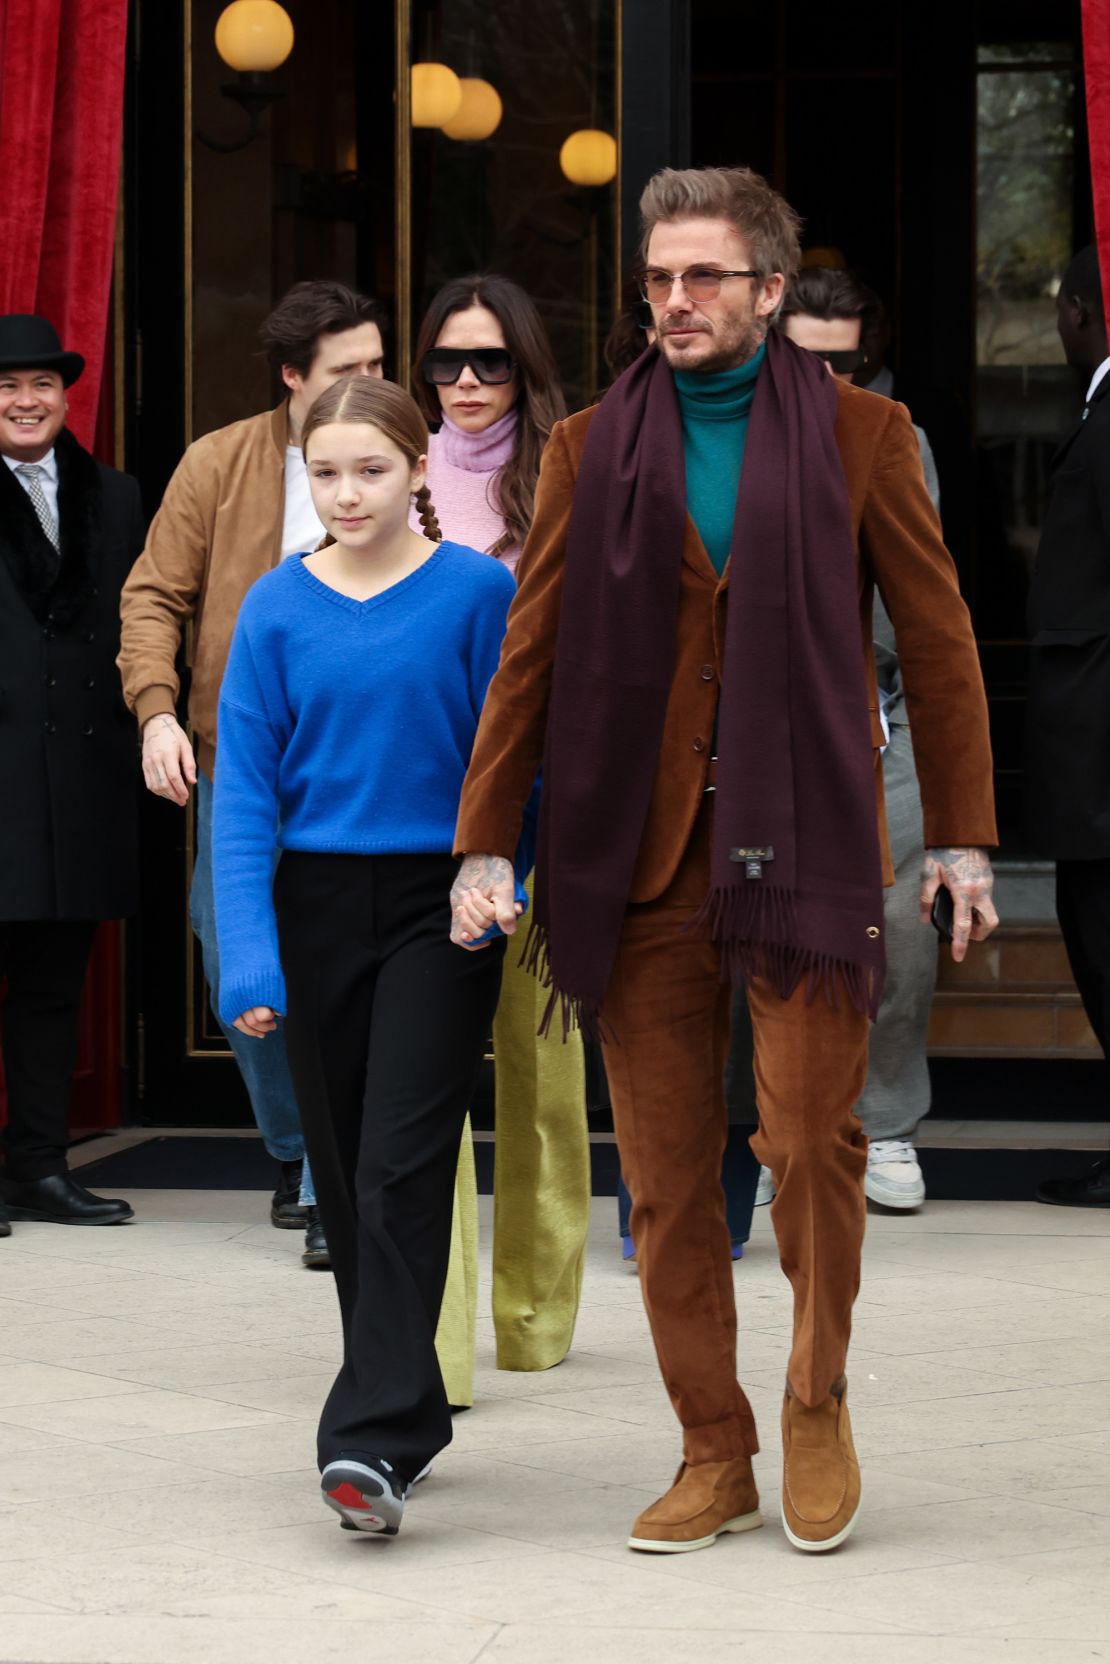 Harper and David Beckham out and about in Paris on March 4, 2023.